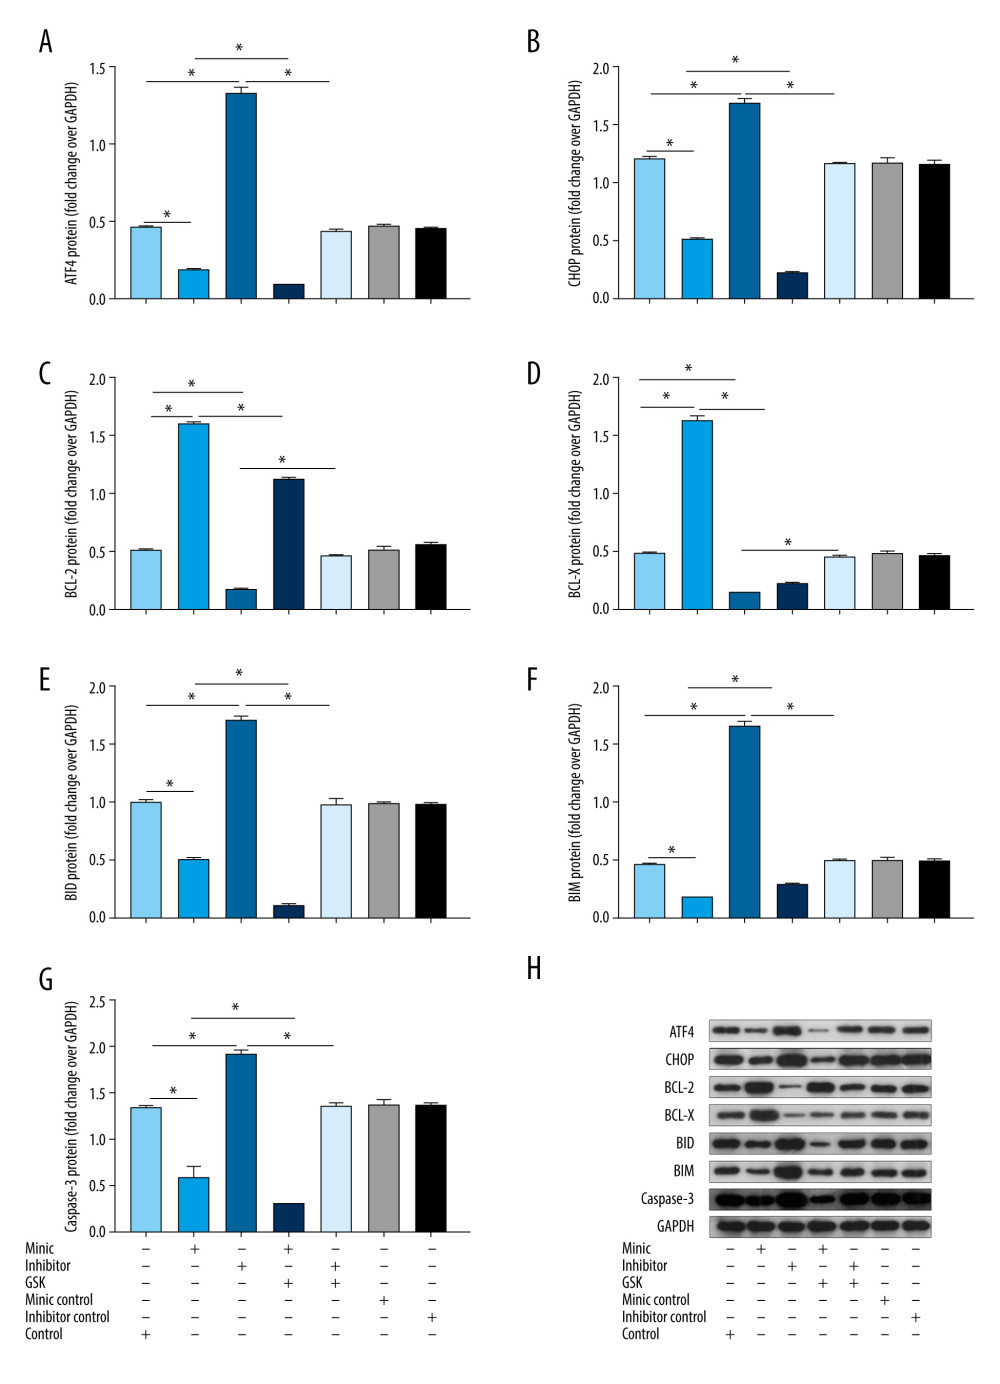 The protein expression levels of endoplasmic reticulum stress and apoptosis-related genes in human amniotic epithelial cells intervened by miR-1283. (A–G) of activating transcription factor 4 (ATF4), C/EBP-homologous protein (CHOP), BCL-2, BCL-X, BH3-interacting domain death agonist (BID), Bcl-2-like protein 11 (BIM), caspase-3 protein expression. (H) Western blotting of indicated proteins. Control – control group; mimic – miR-1283 mimic group; inhibitor – miR-1283 inhibitor group; GSK – GSK2656157; mimic control – miR-1283 mimic negative control; inhibitor control – miR-1283 inhibitor negative control group. * P<0.05.